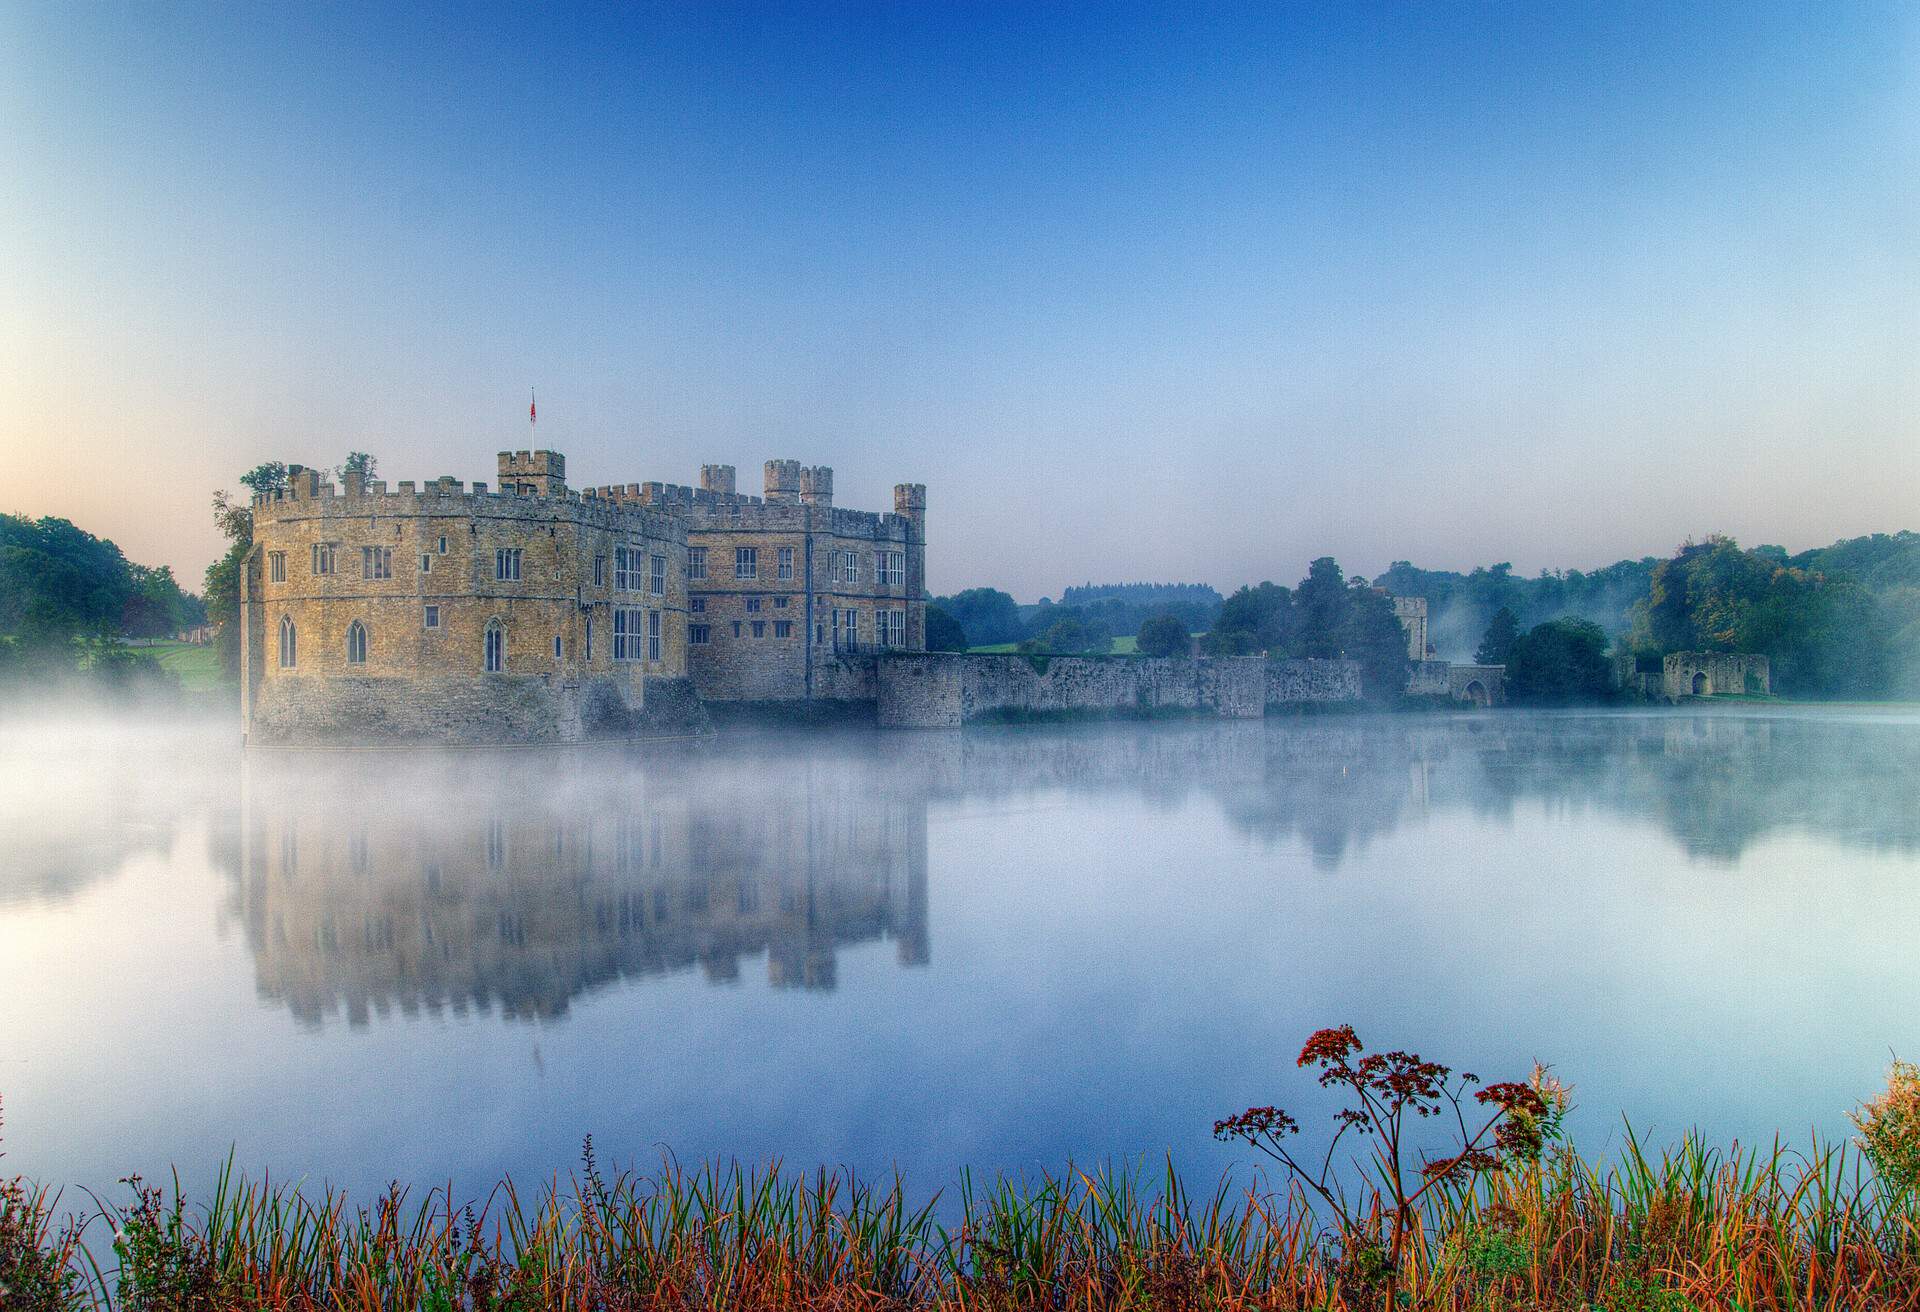 Leeds castle taken Just before the Sun appeared over the hill